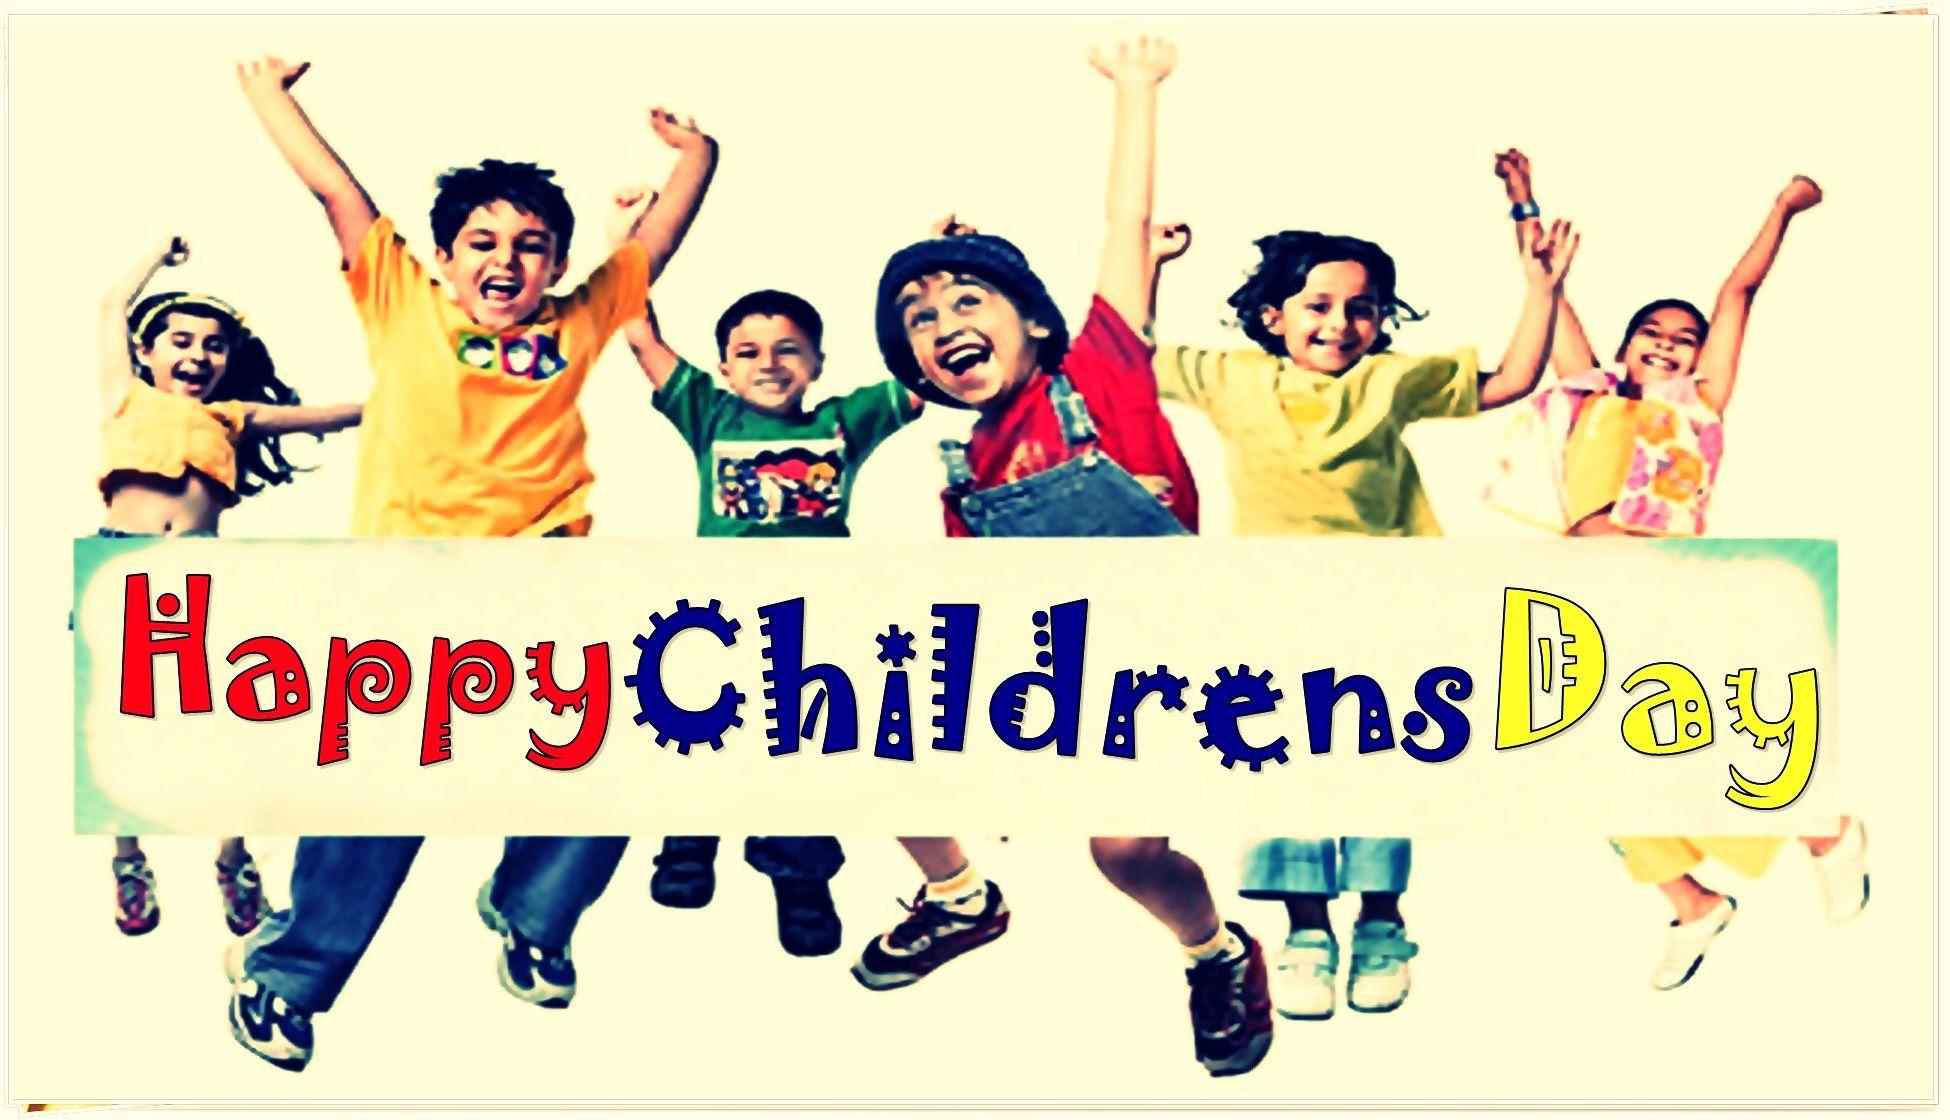 Happy Childrens Day Image for Whatsapp DP, Profile Wallpaper